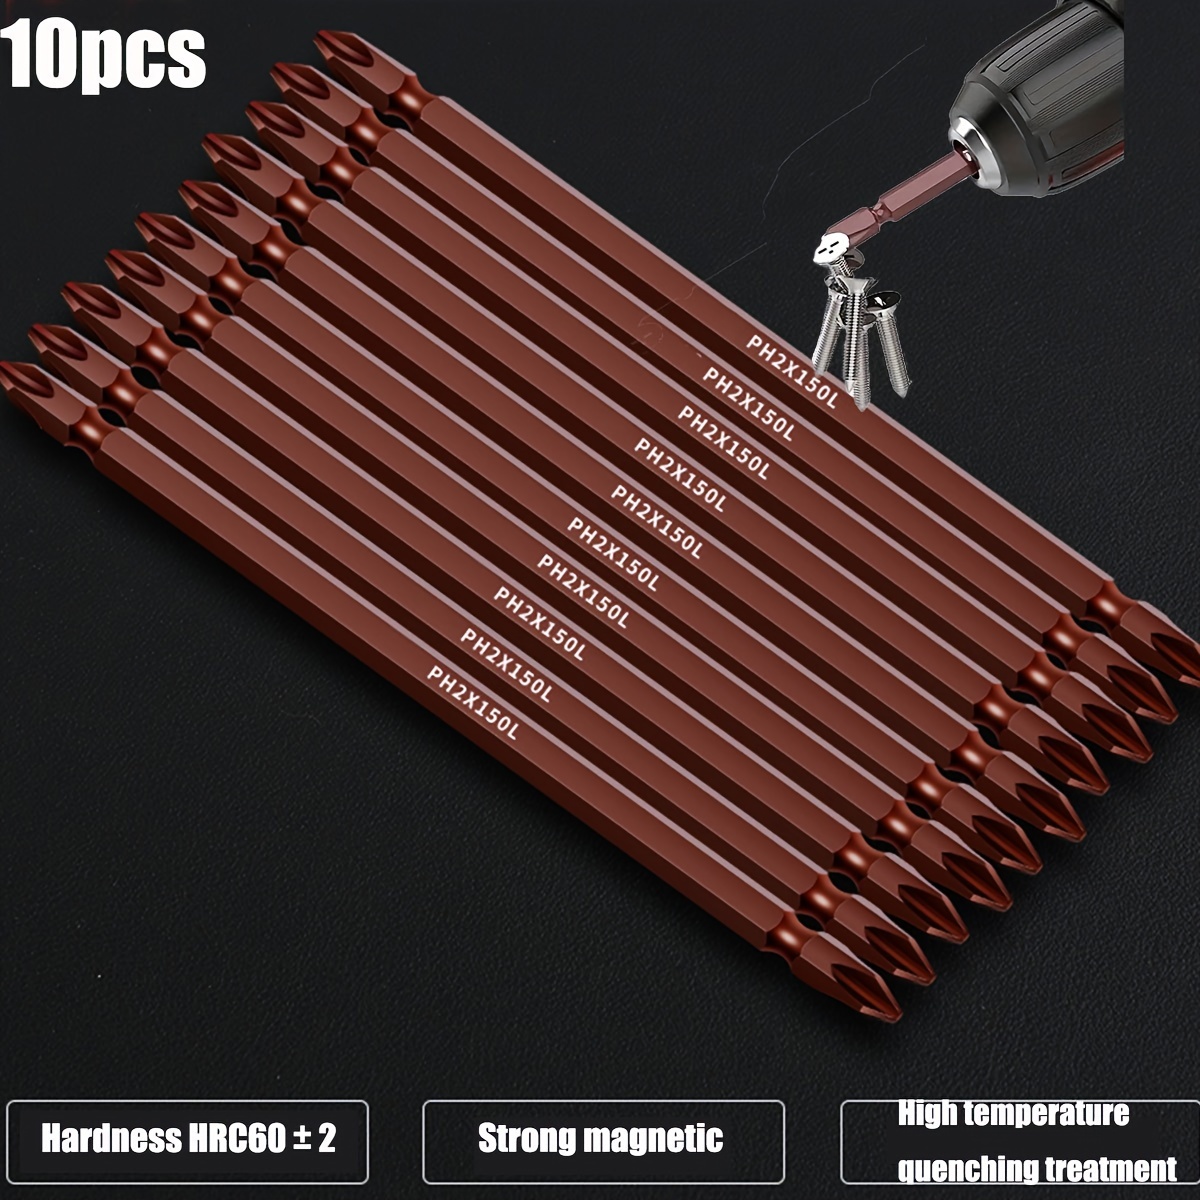 

10pcs 6inches/150mm Magnetic Double-headed Bit S2 Steel Handheld Electric Tool For Screw Installation And Disassembly